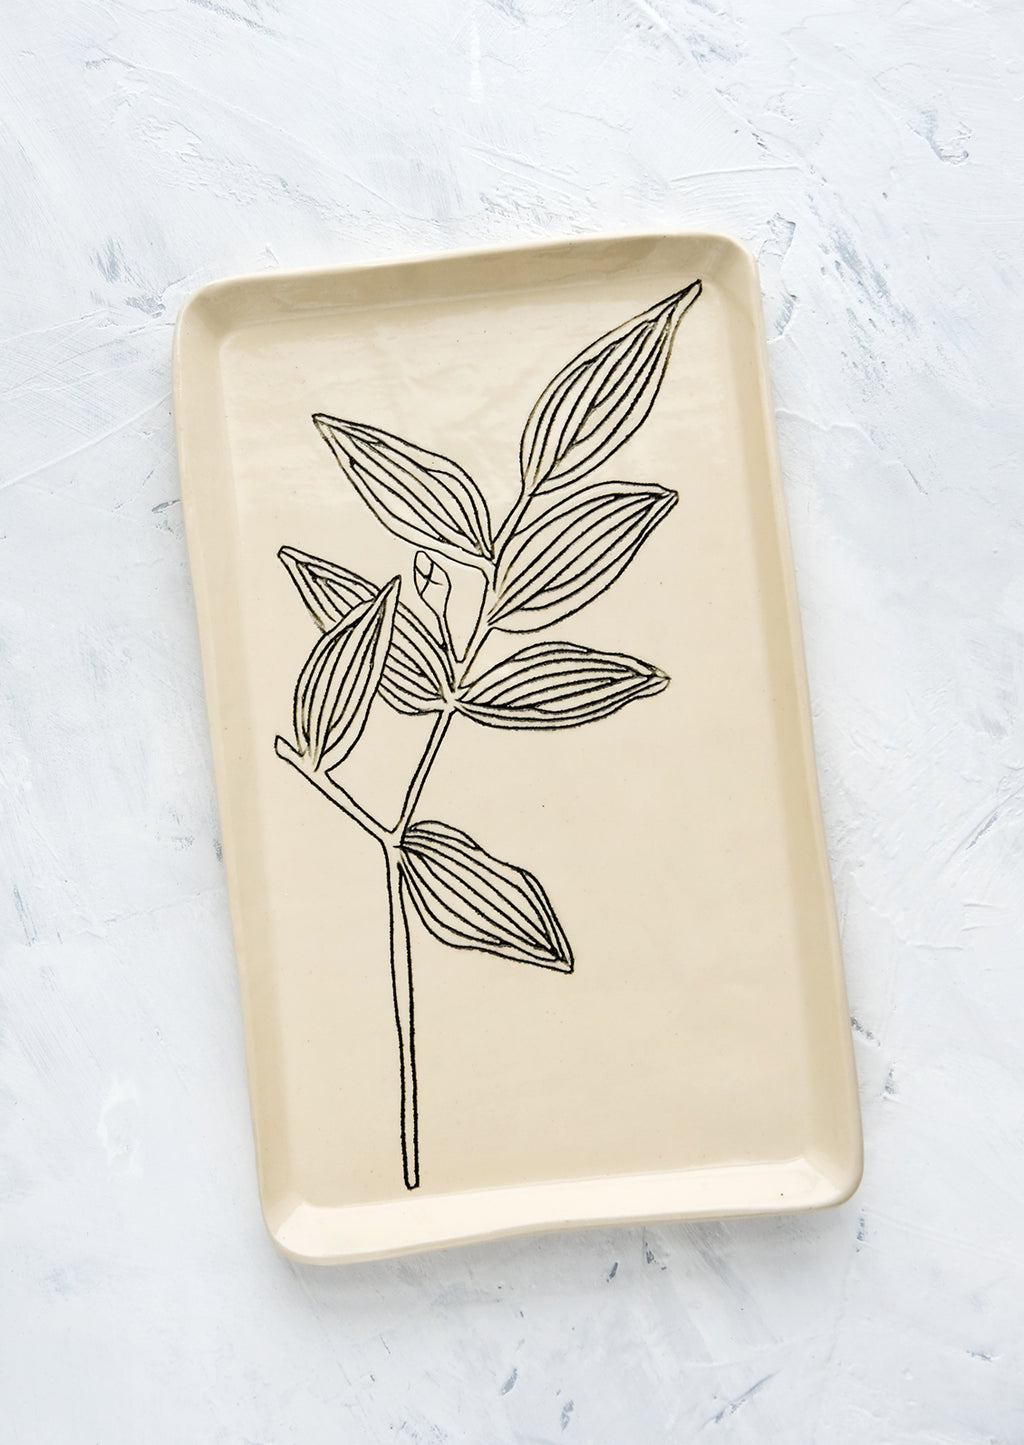 Bellwort: A rectangular ceramic tray in natural bisque color with an etched black drawing of Bellwort plant.